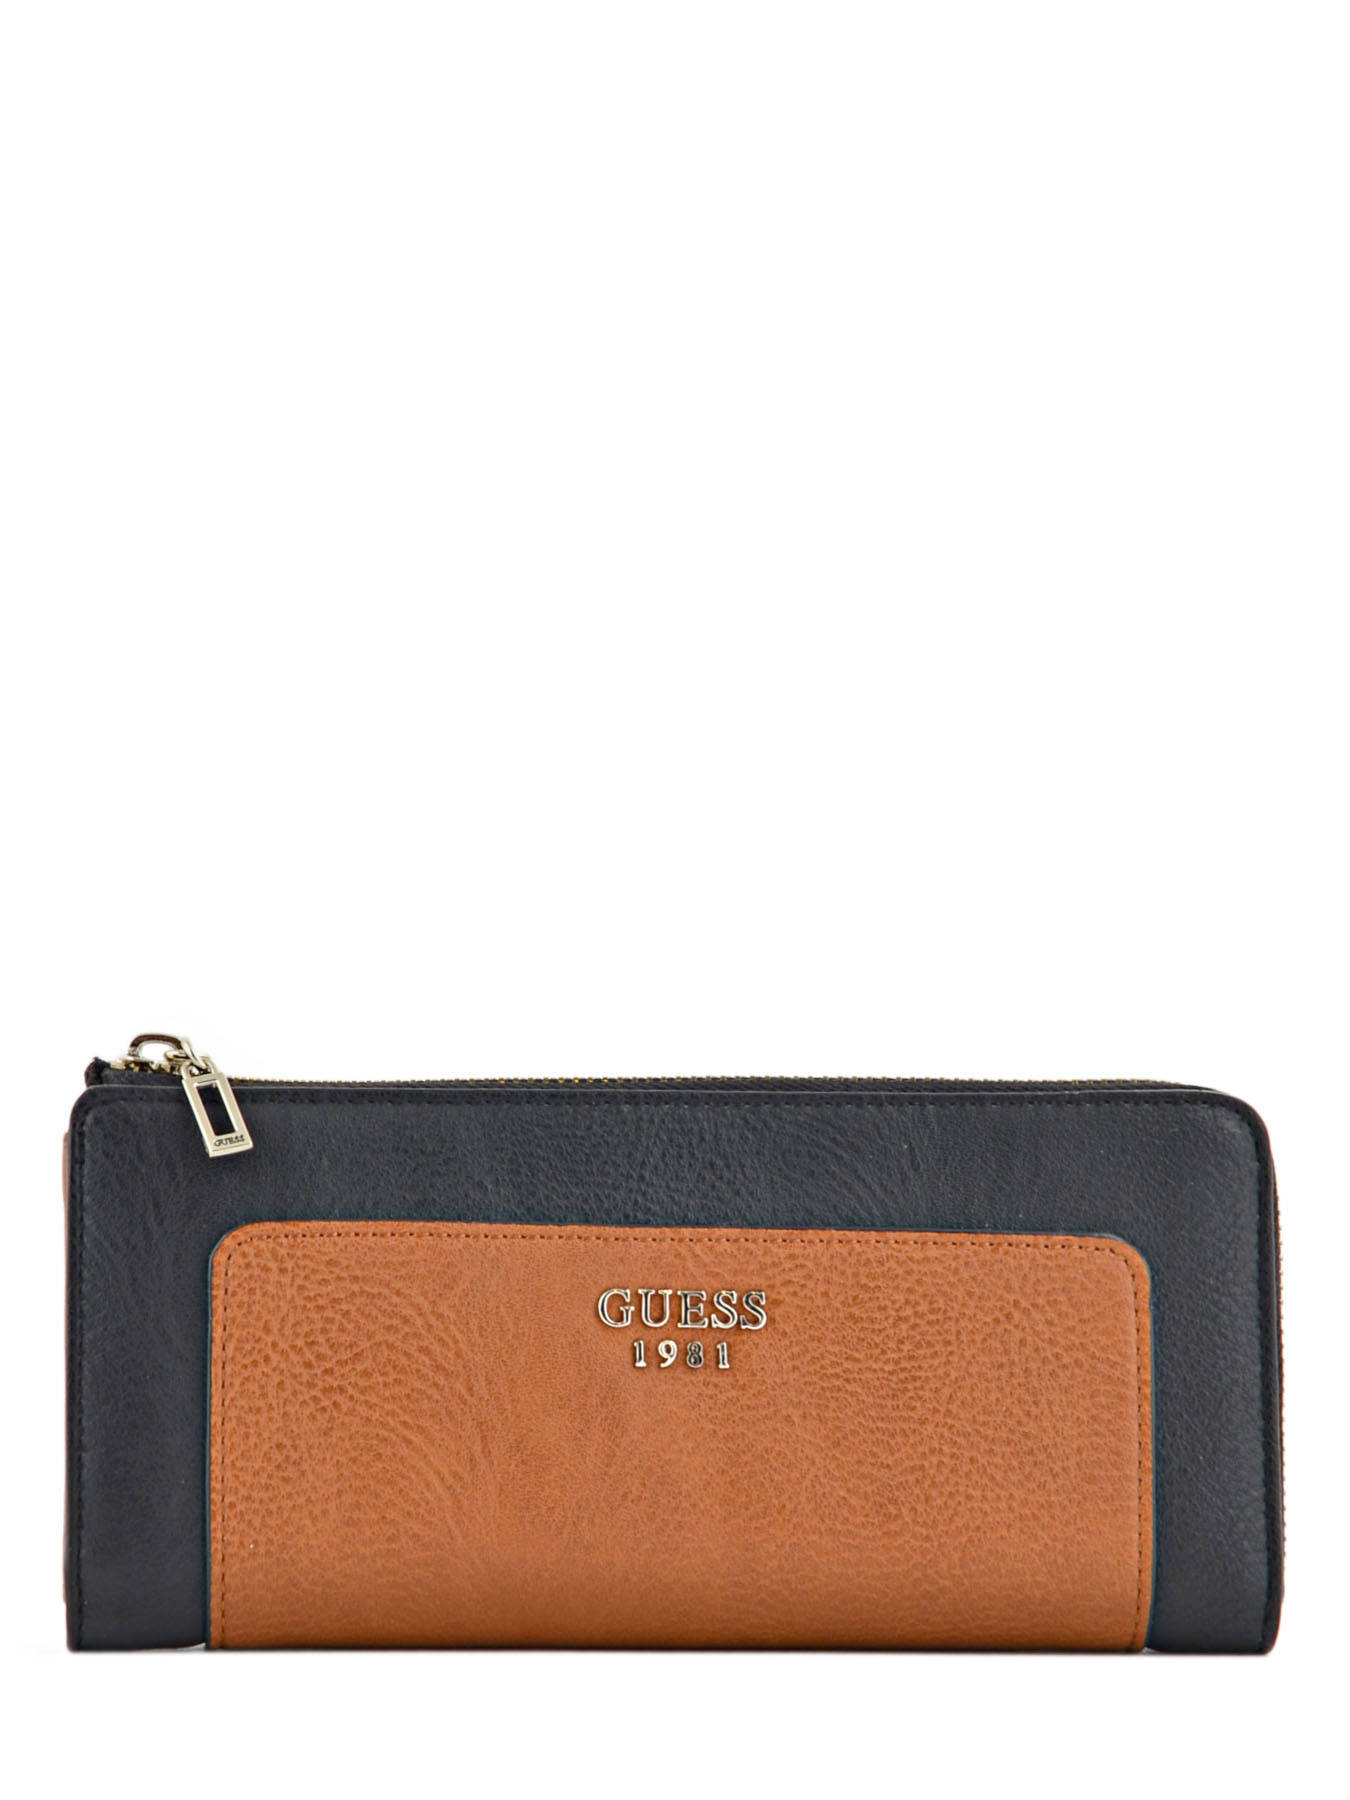 Guess Wallet Mooney - Best prices